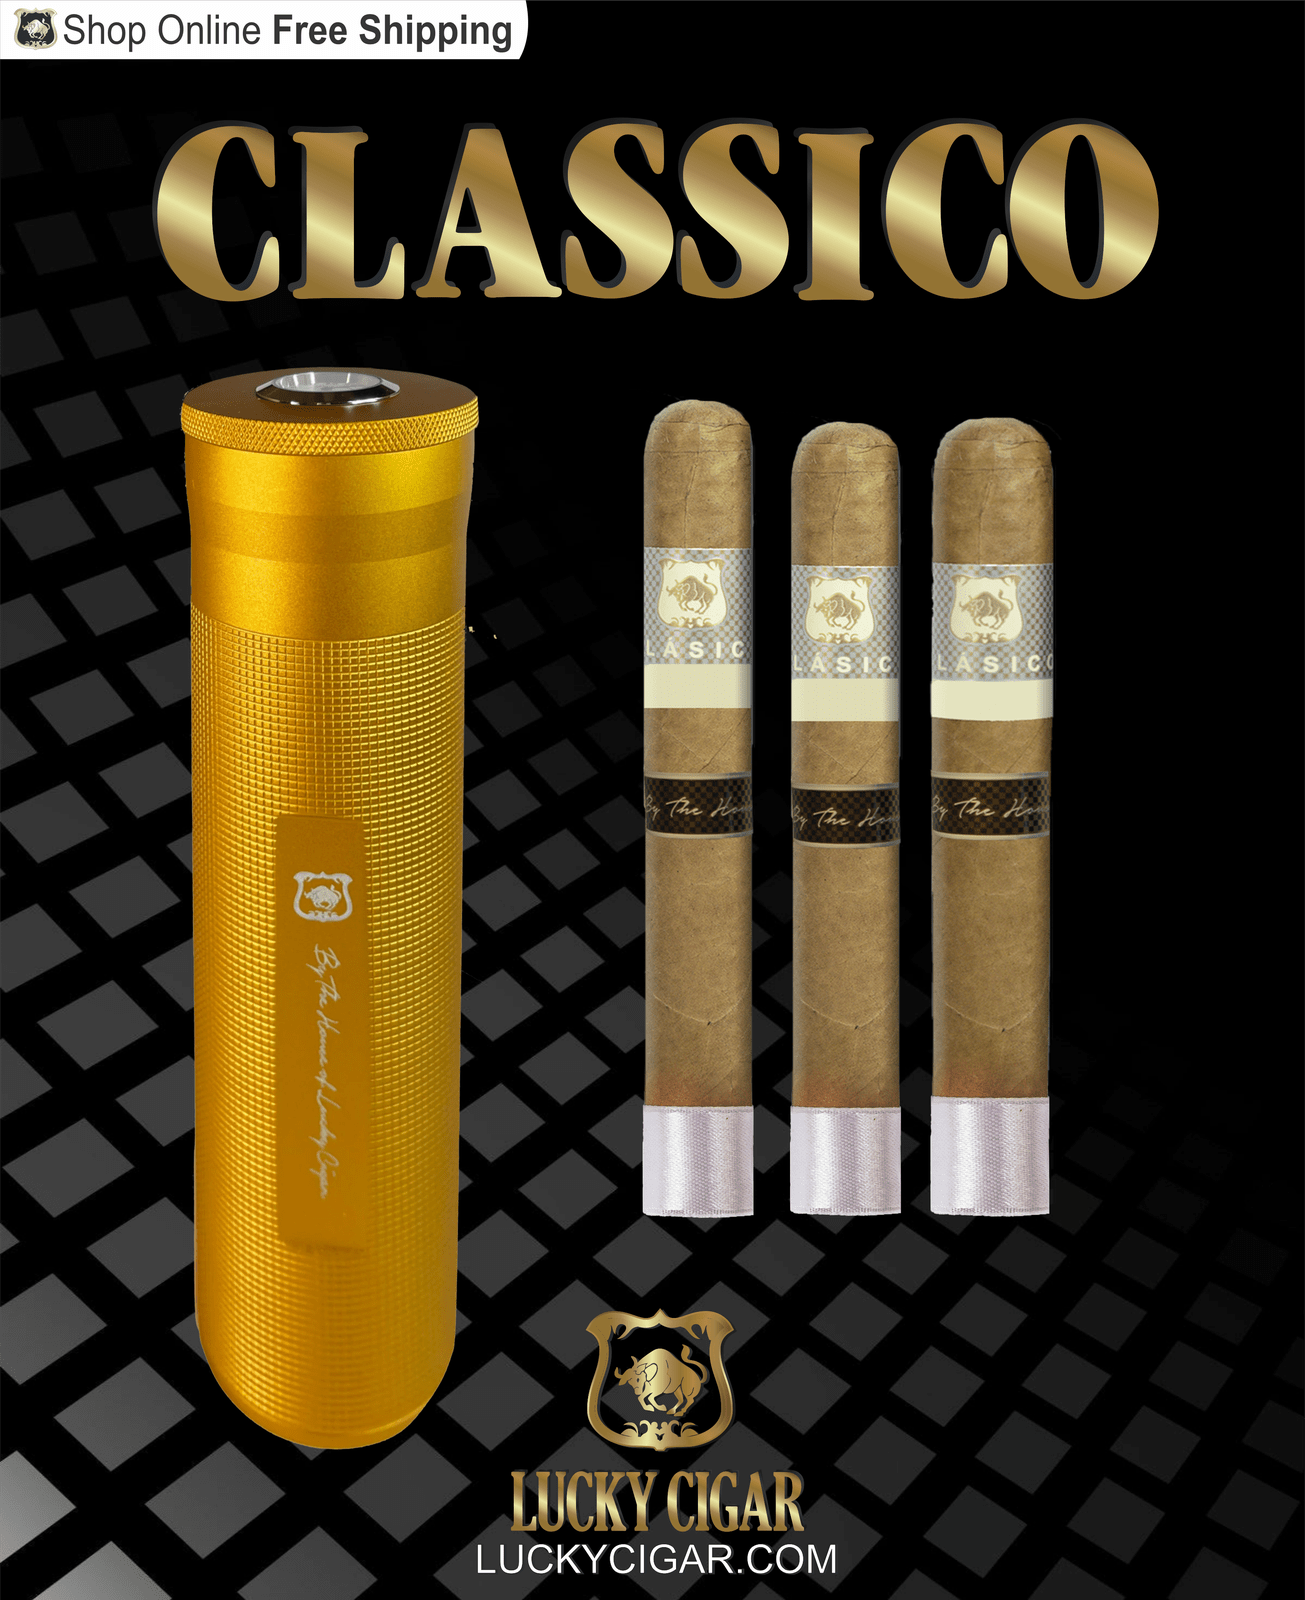 Lucky Cigar Sampler Sets: Set of 3 Classico Cigars with Travel Humidor Tube with Hygrometer